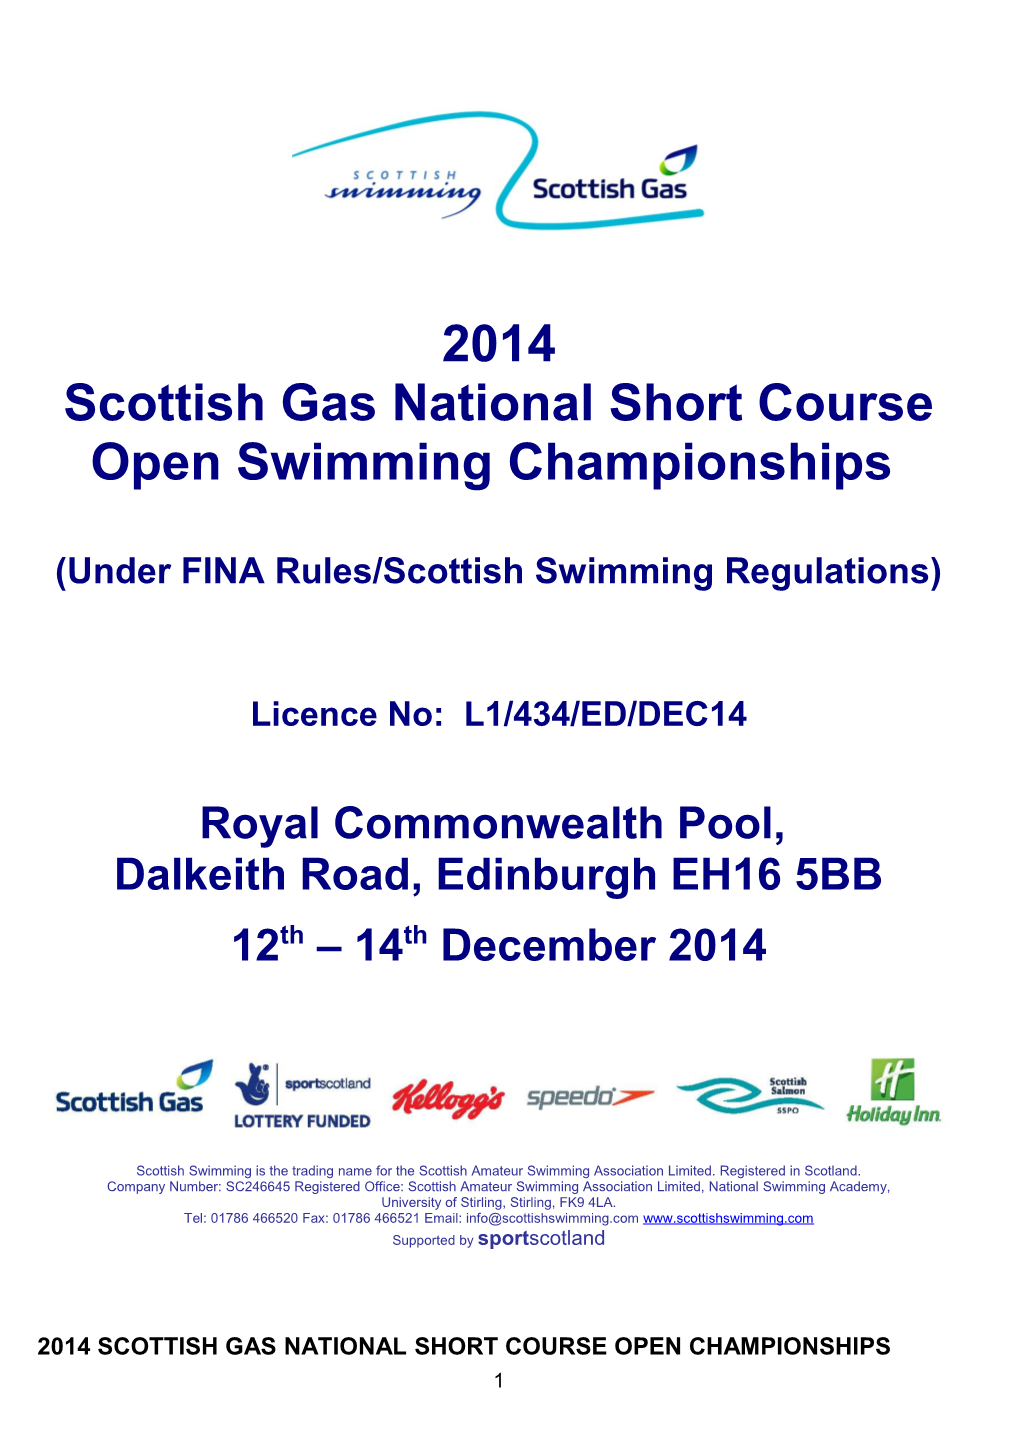 Scottish Gas National Short Course Open Swimming Championships